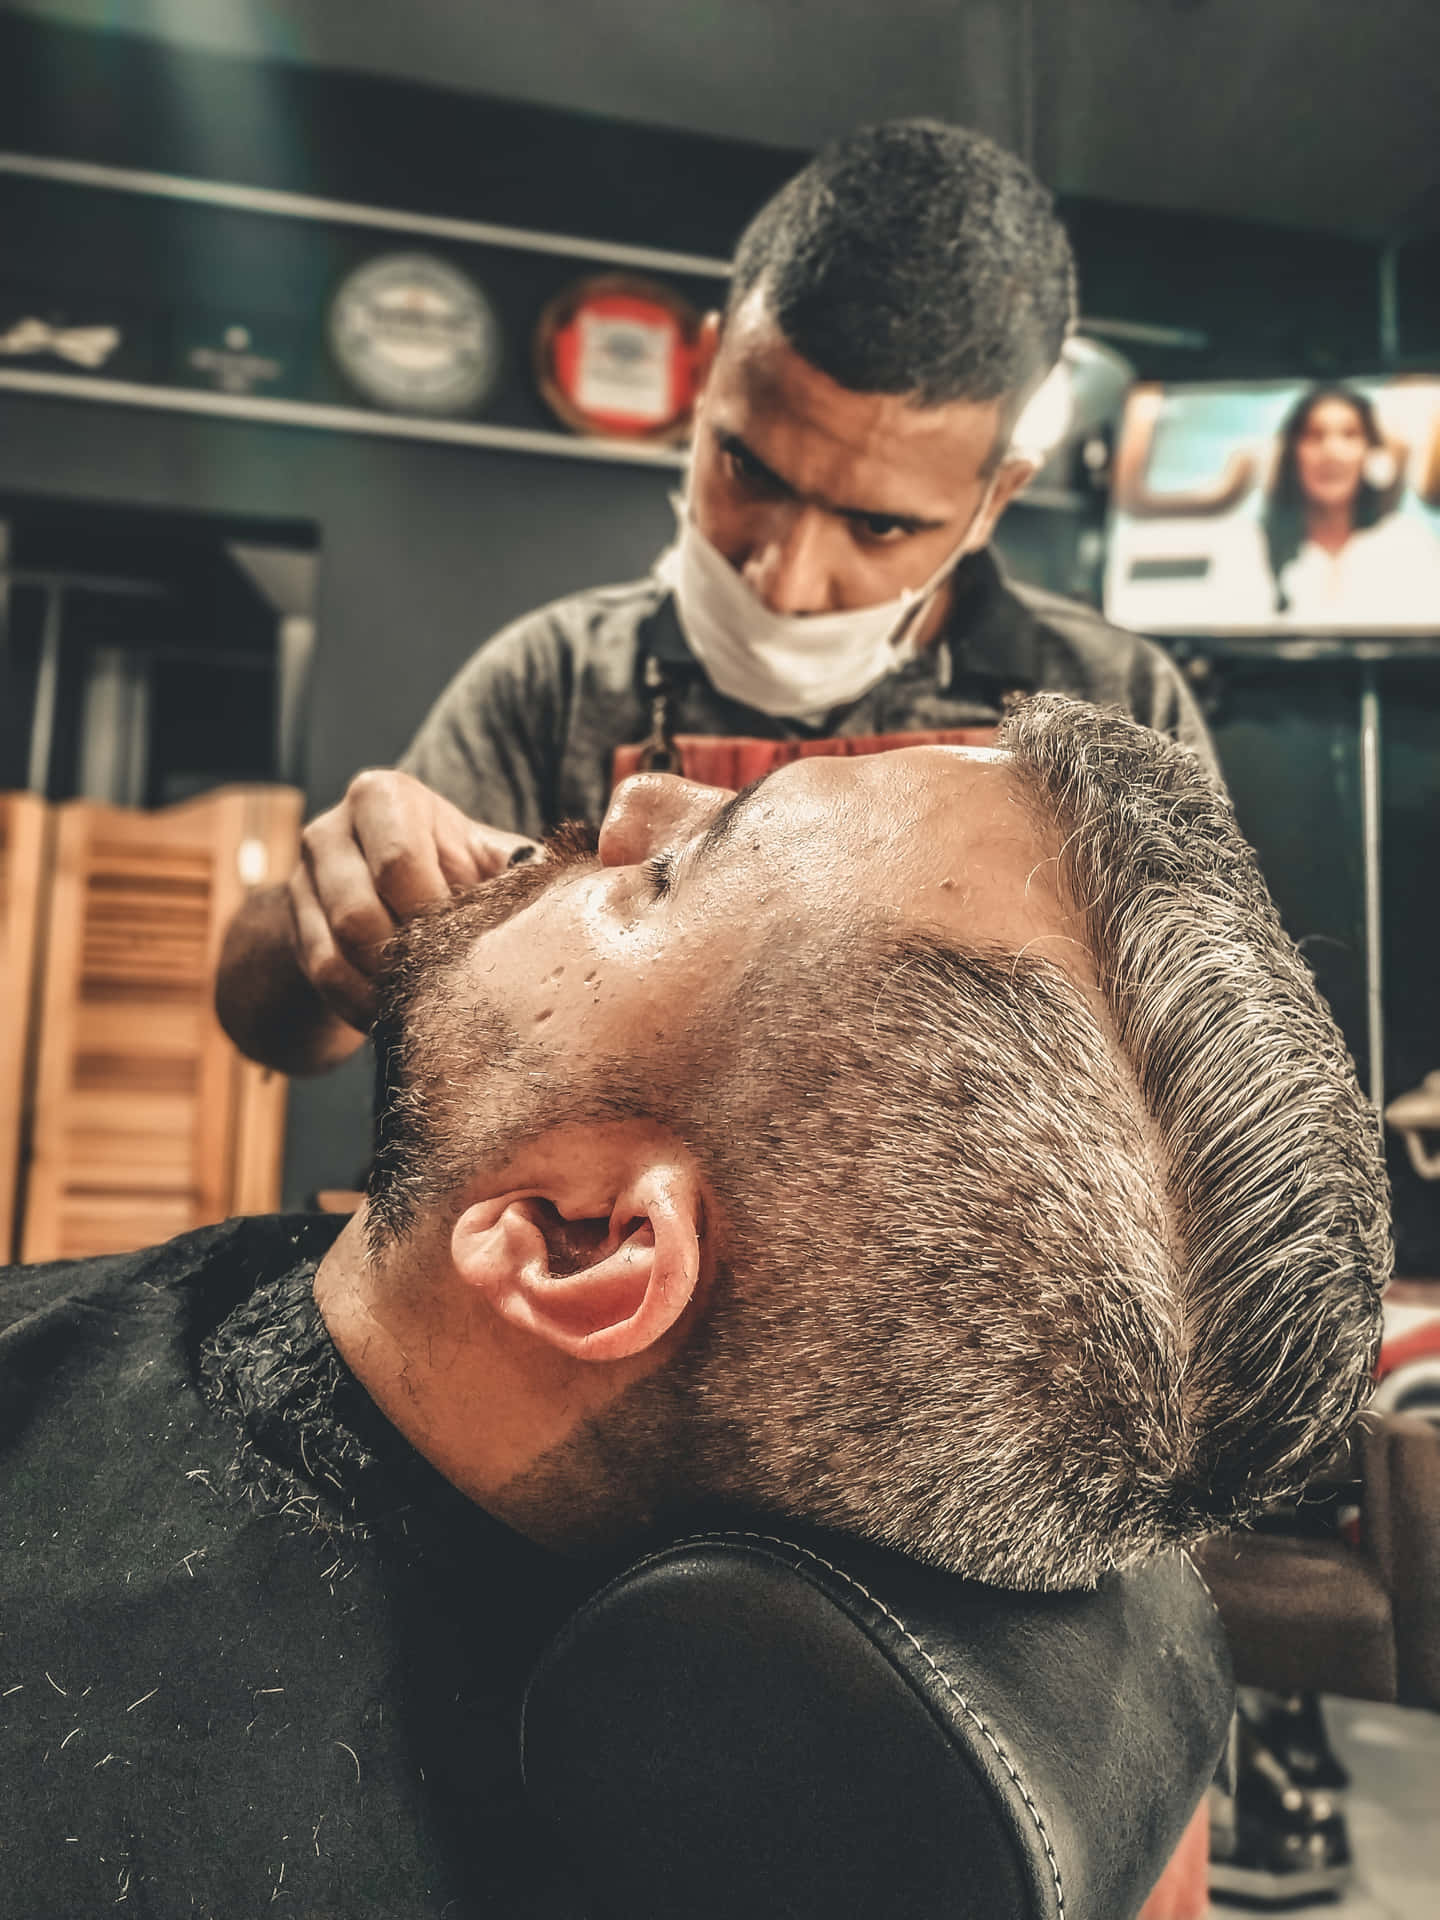 Barber Cutting The Hair Of The Customer With Face Mask Wallpaper